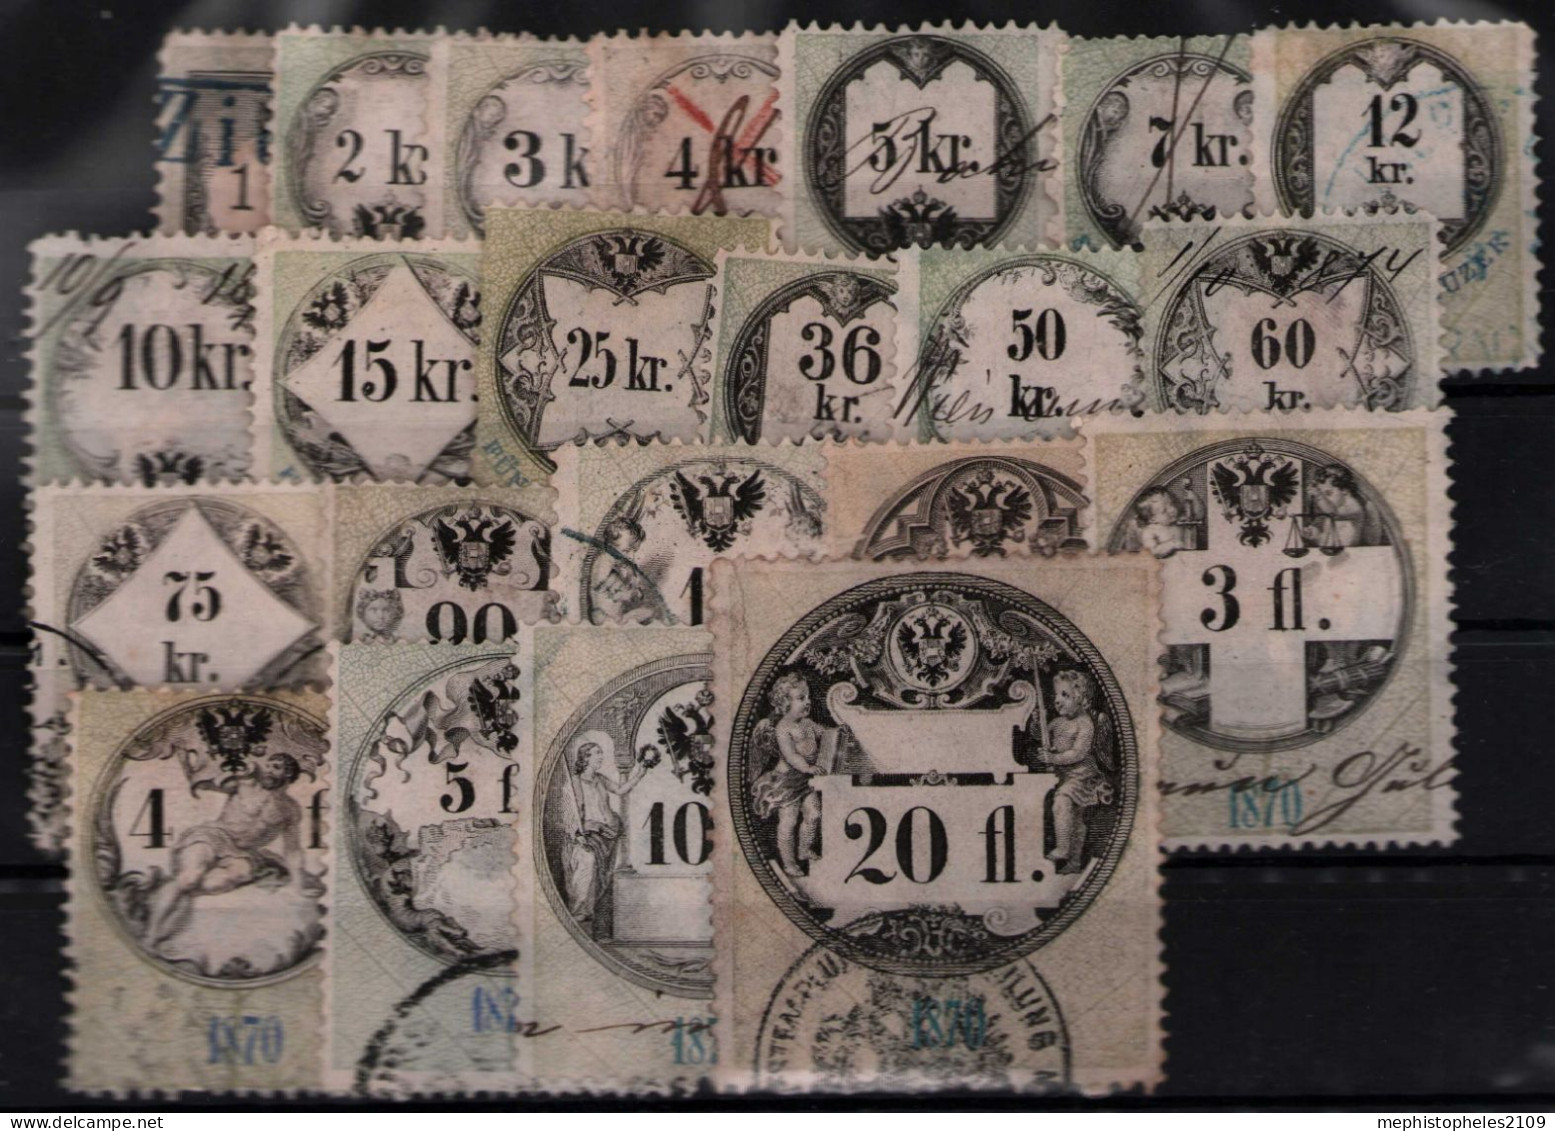 AUSTRIA 1870 - Canceled - 22 Fiscal Stamps (set Nearly Complete) - Fiscale Zegels